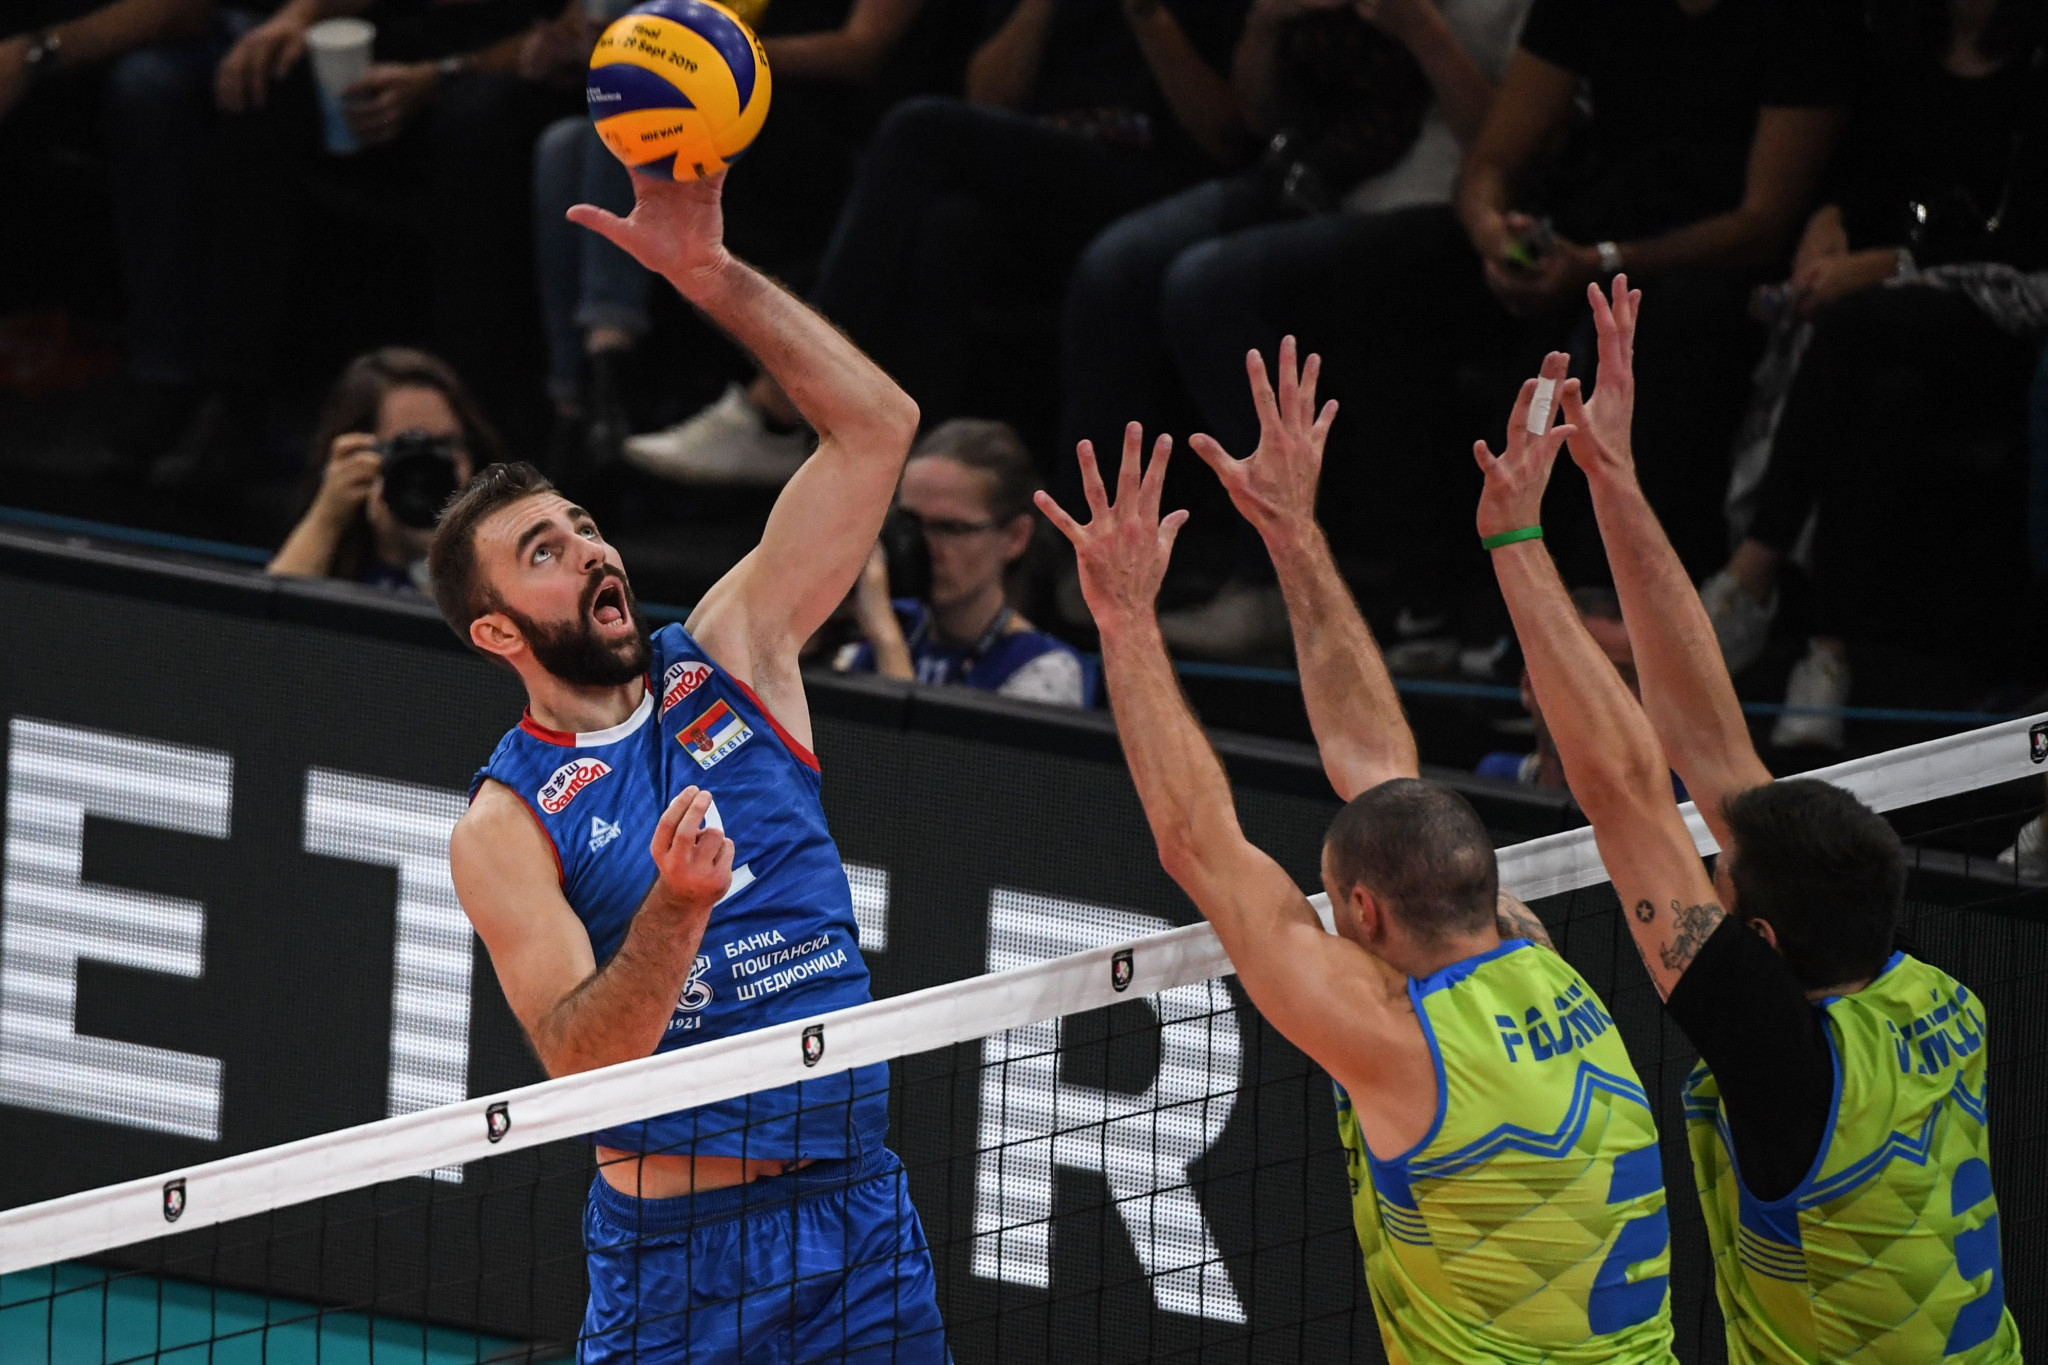 Defending champions Serbia and Poland progress to Men's EuroVolley semi-finals in straight sets